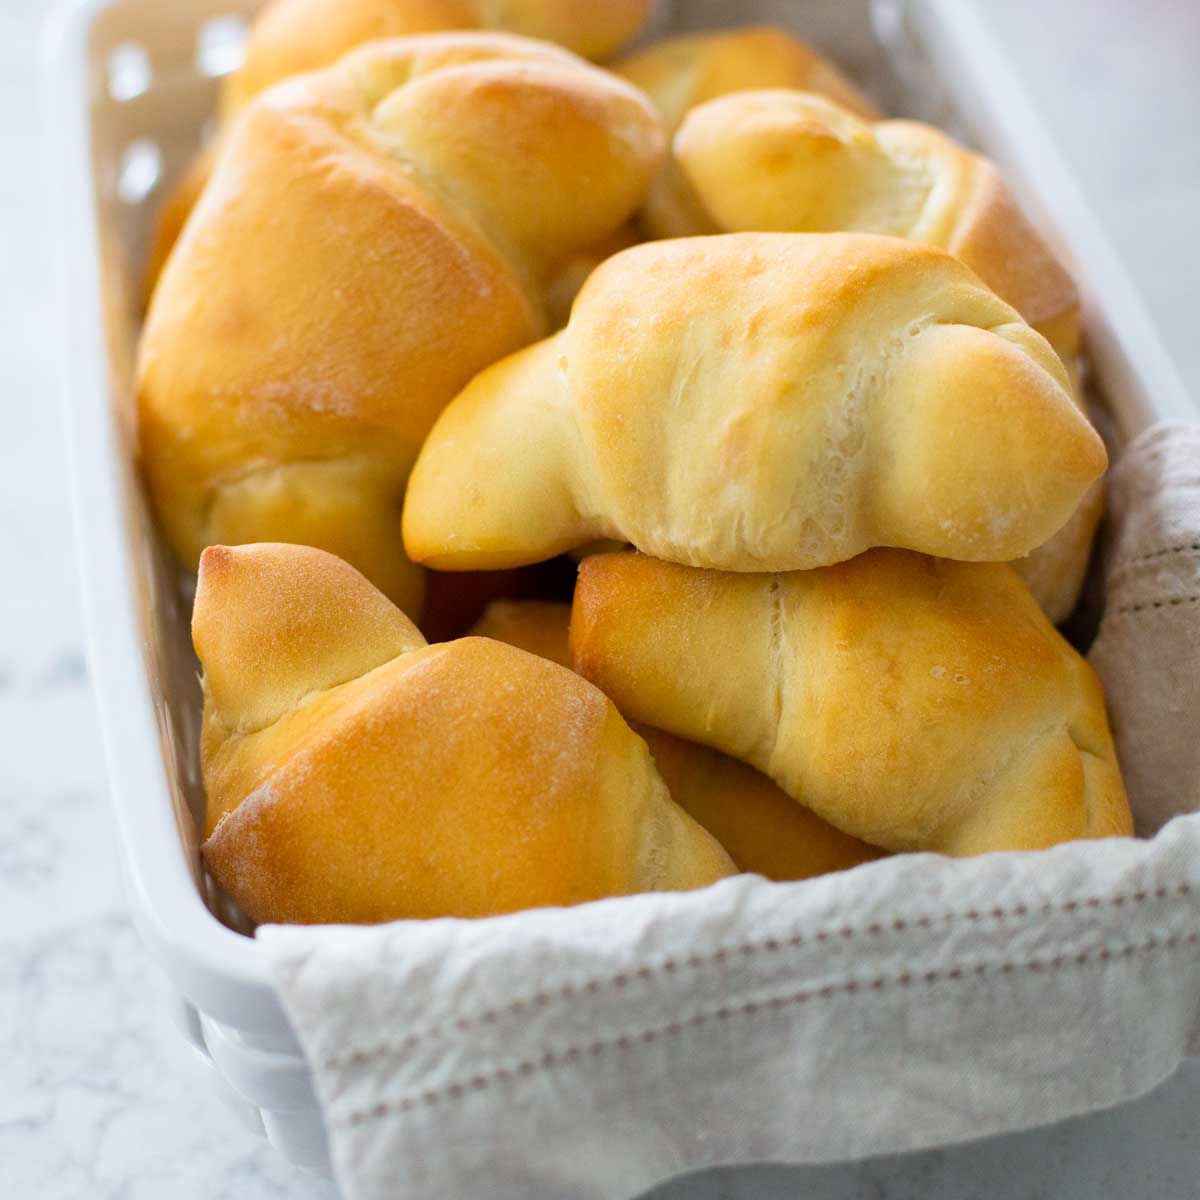 A bread basket is lined with a napkin and filled with golden crescent dinner rolls from the bread machine.